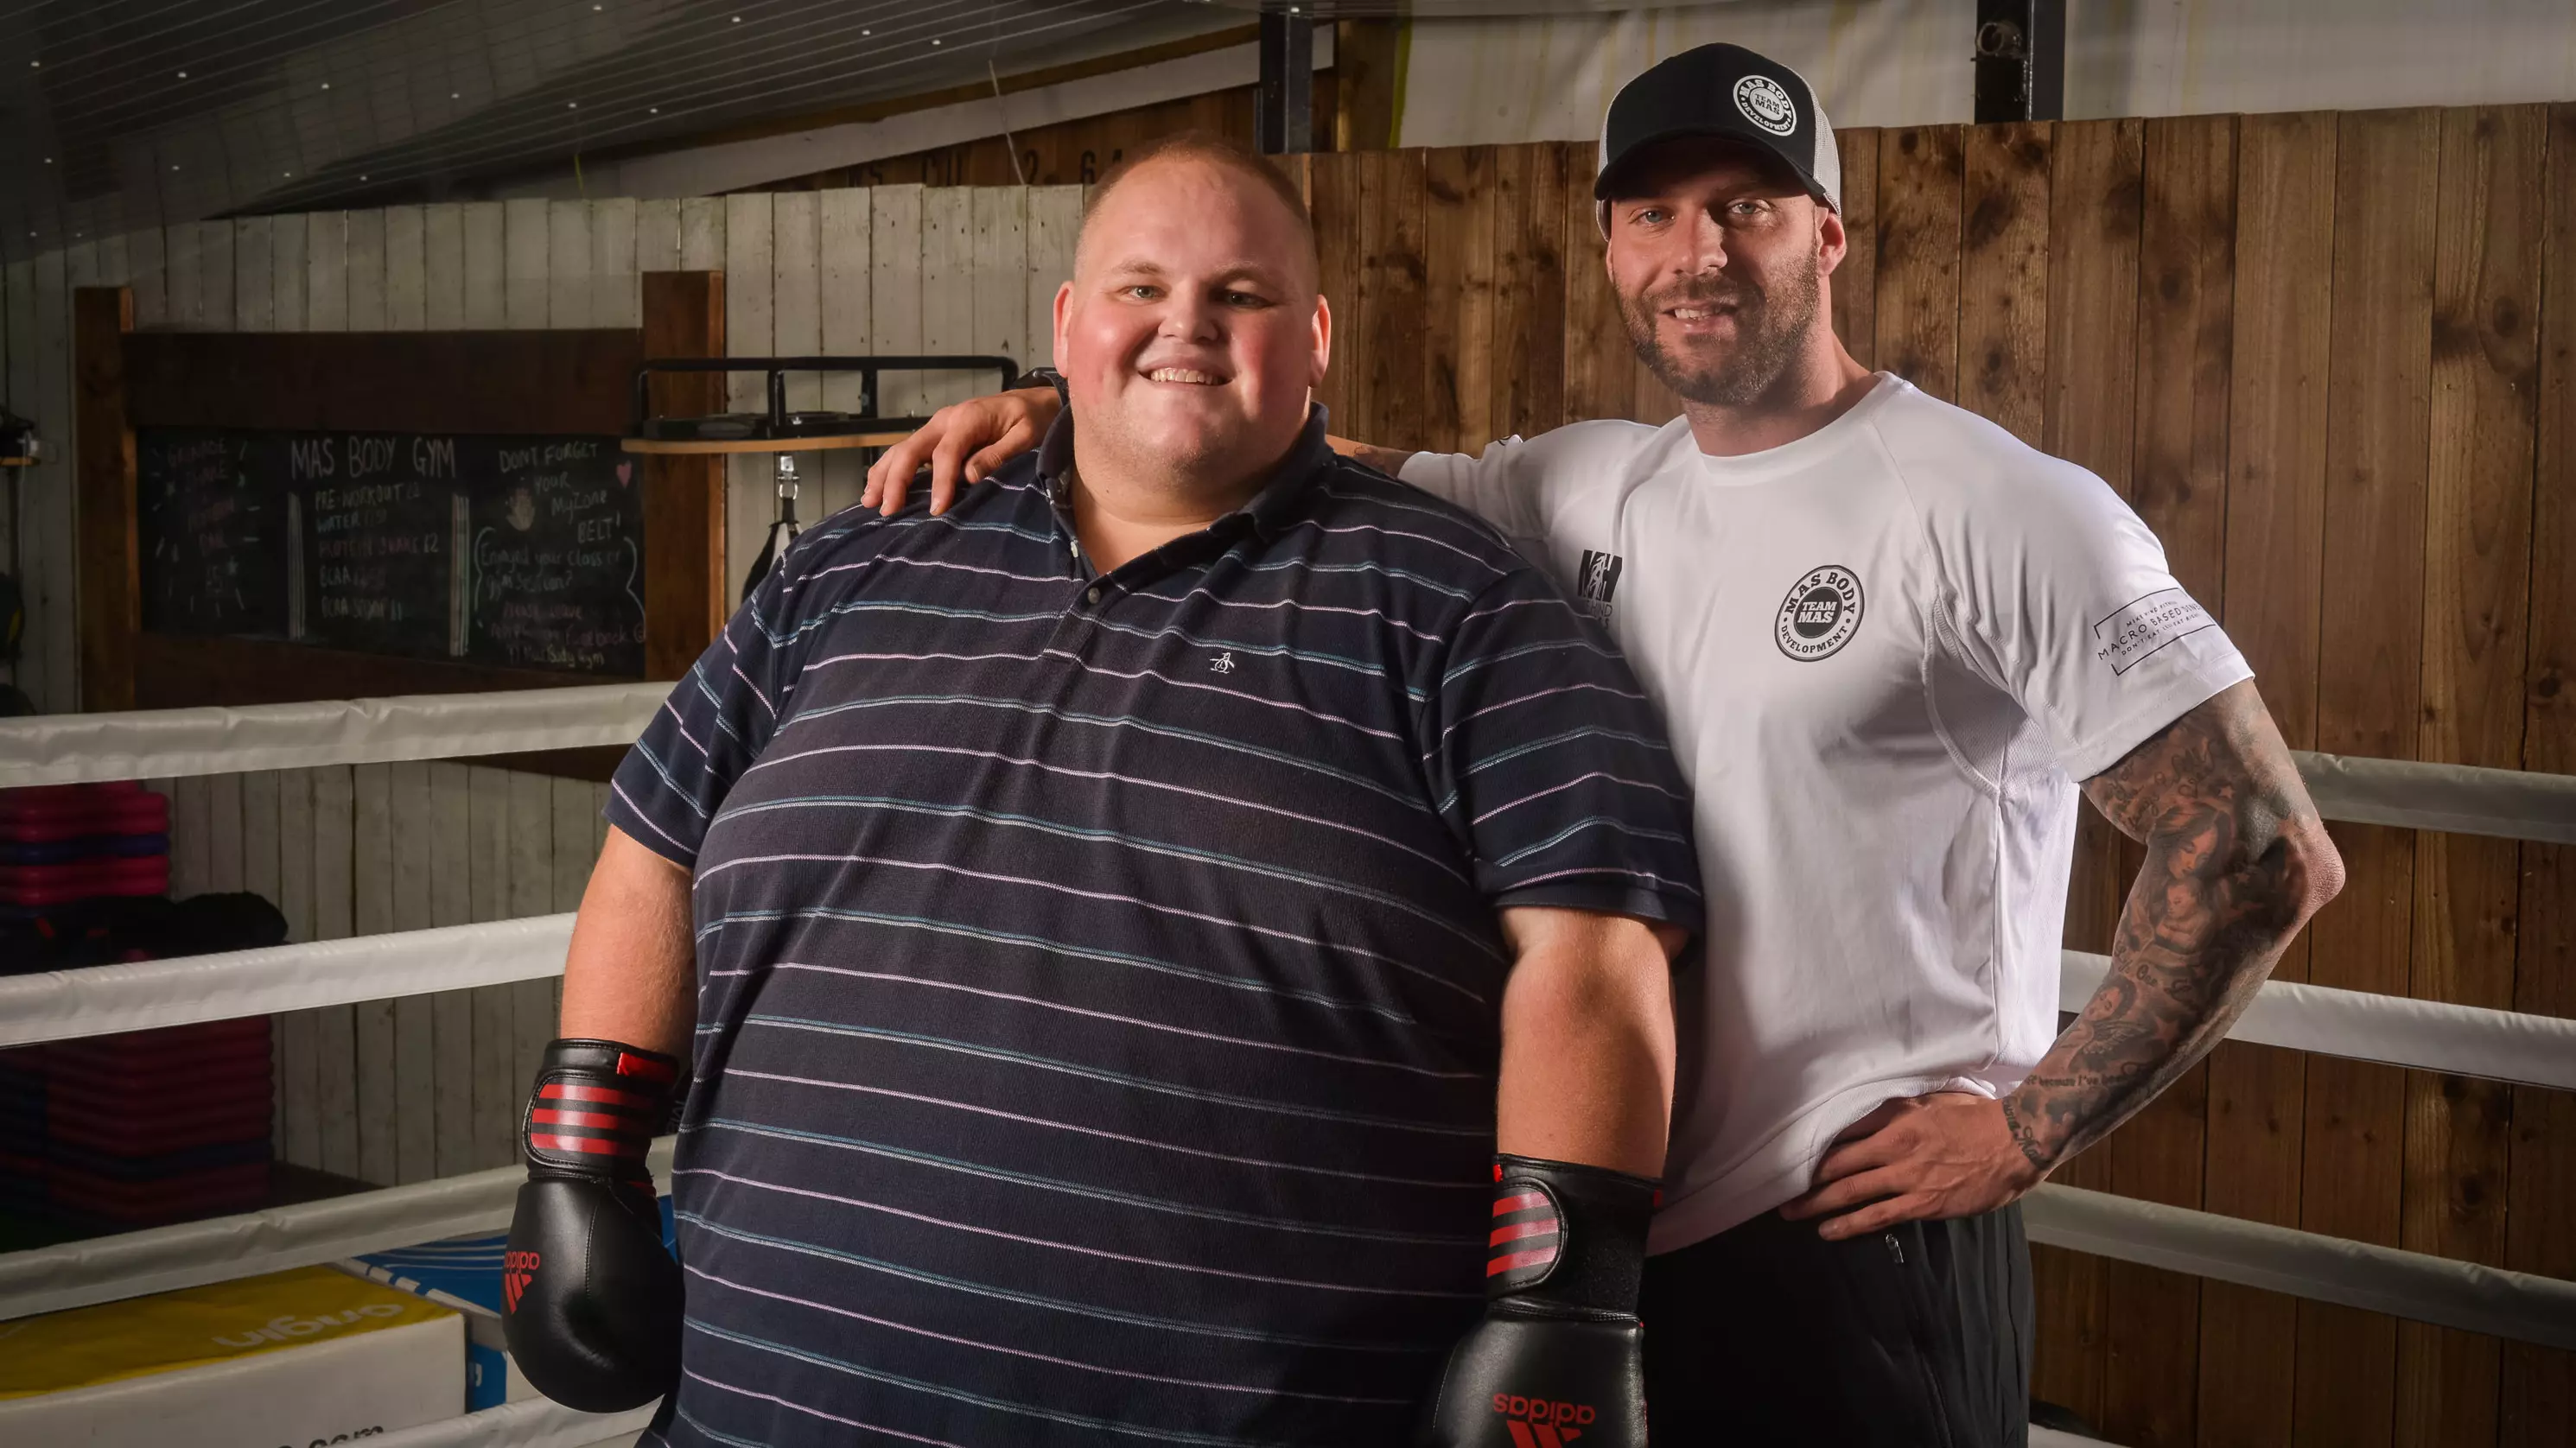 Man Loses 10 Stone In 15 Weeks In A Journey To Save His Life 